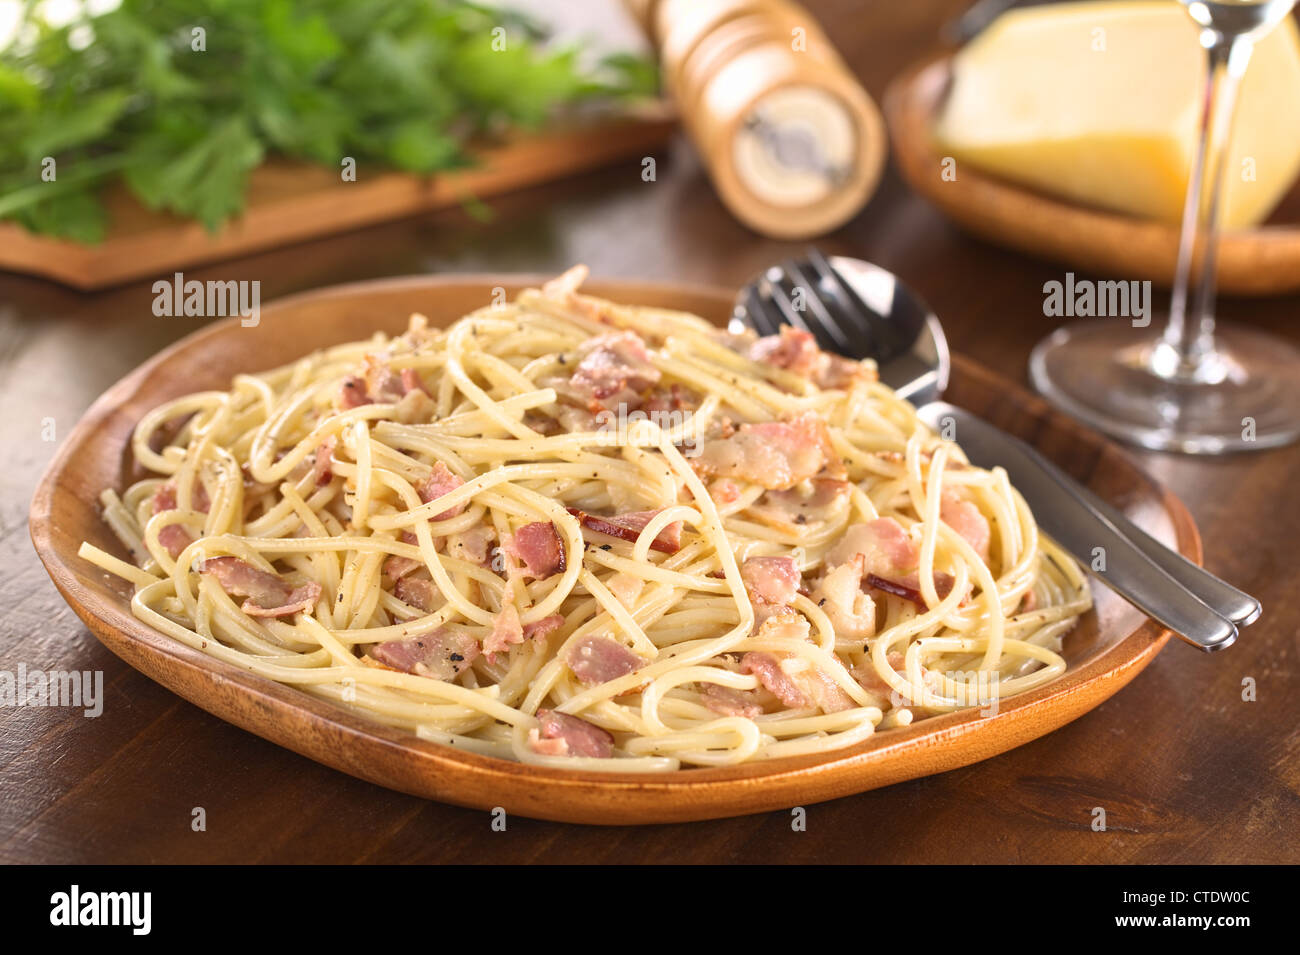 Spaghetti alla Carbonara served on wooden plate (Selective Focus, Focus one third into the meal) Stock Photo